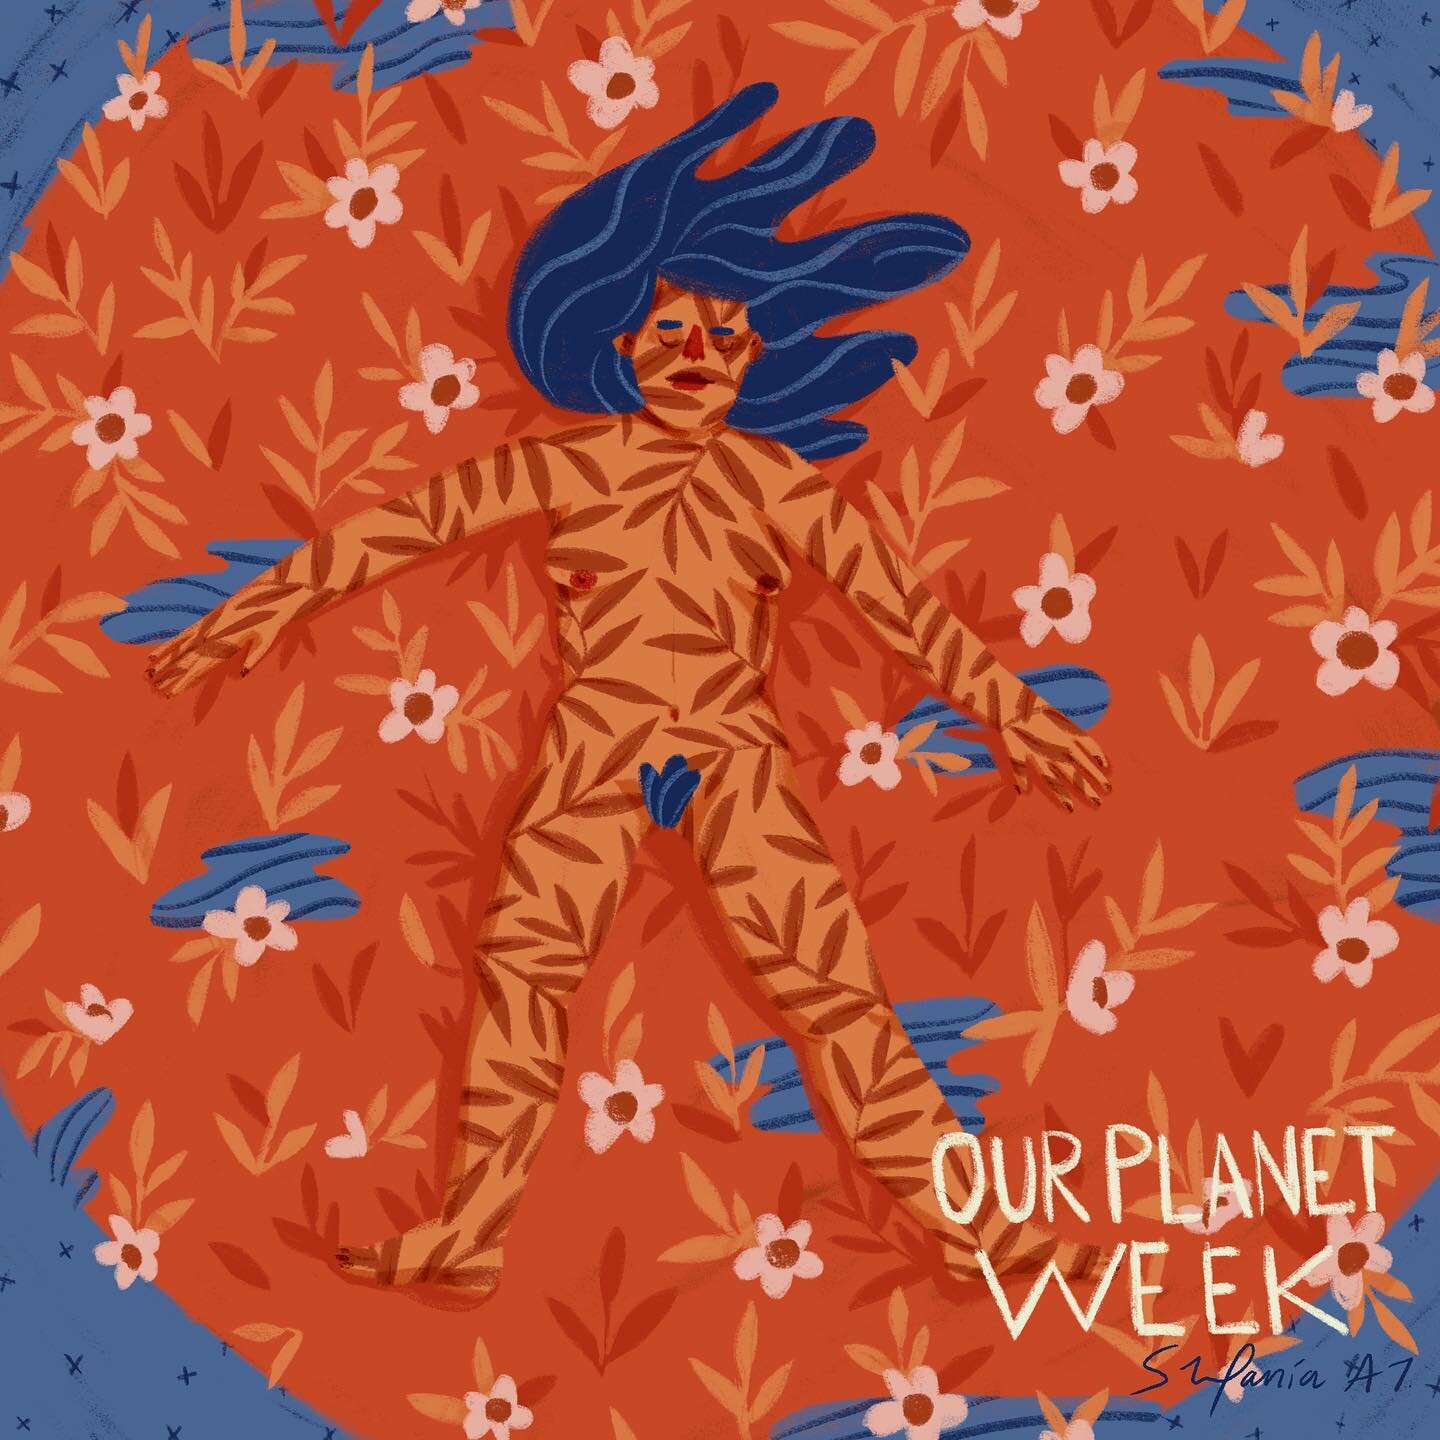 Our planet week &lsquo;Protect&rsquo; 
Joining @ourplanetweek who will plant a tree for each illustration posted from 21st to the 31st of march! 
.
.
.
.
.
.
#ourplanetweek #ourplanetweek2021 #protect #protecttheplanet #bluehair #illustration #onetre